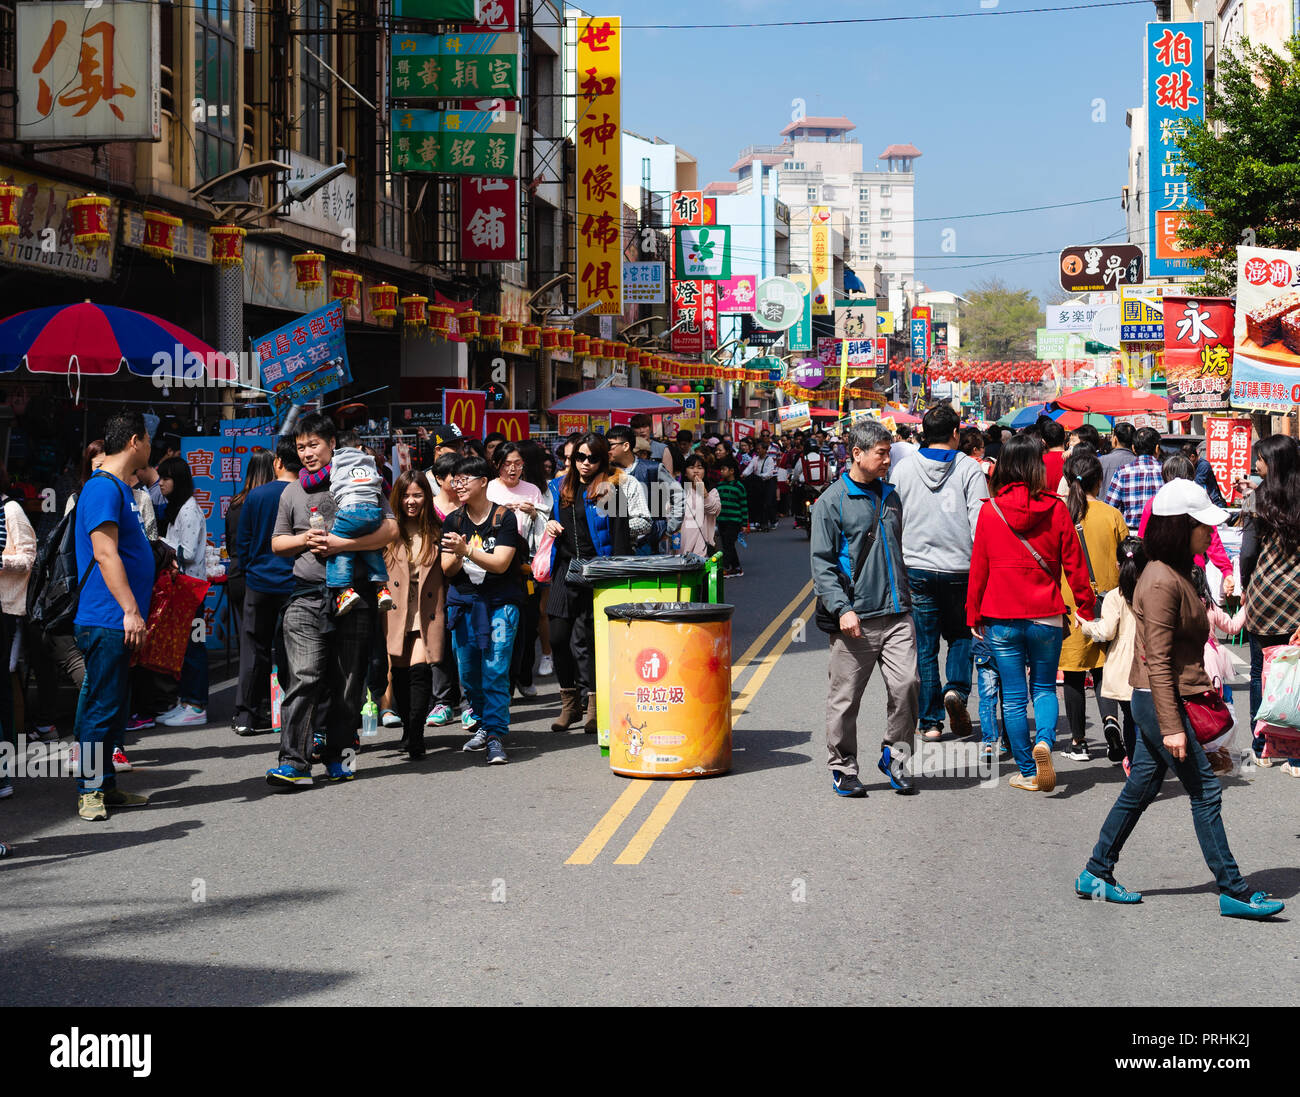 16 February 2018, Lukang Changhua Taiwan : Lugang street view celebration with tourists crowd on Chinese new year day in Lukang Taiwan Stock Photo